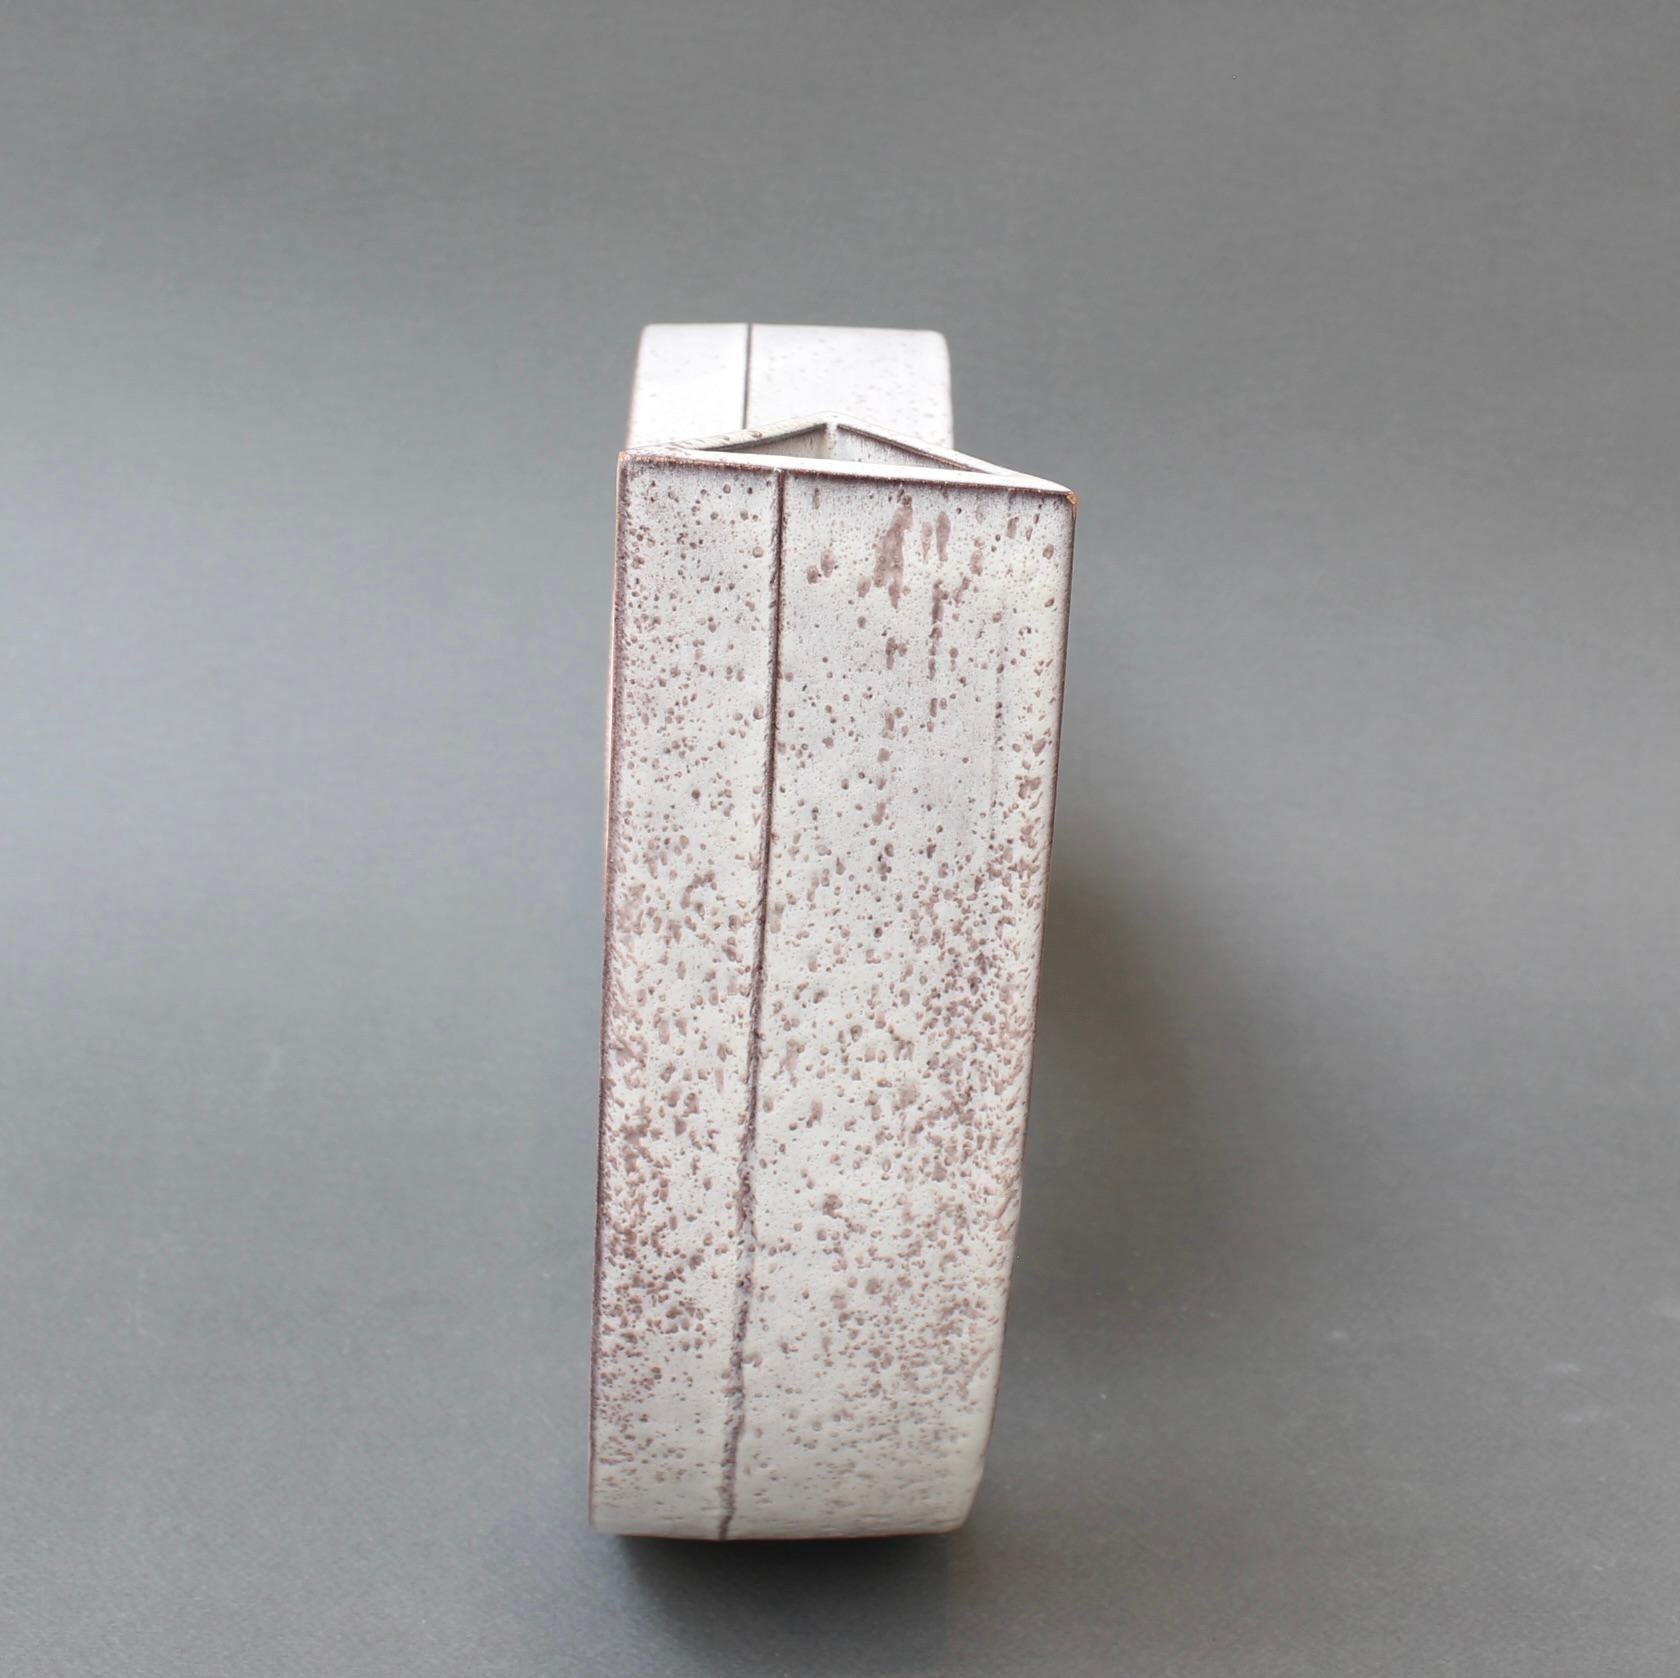 Italian Vintage Industrial Style Ceramic Vase by Alessio Tasca (circa 1970s) For Sale